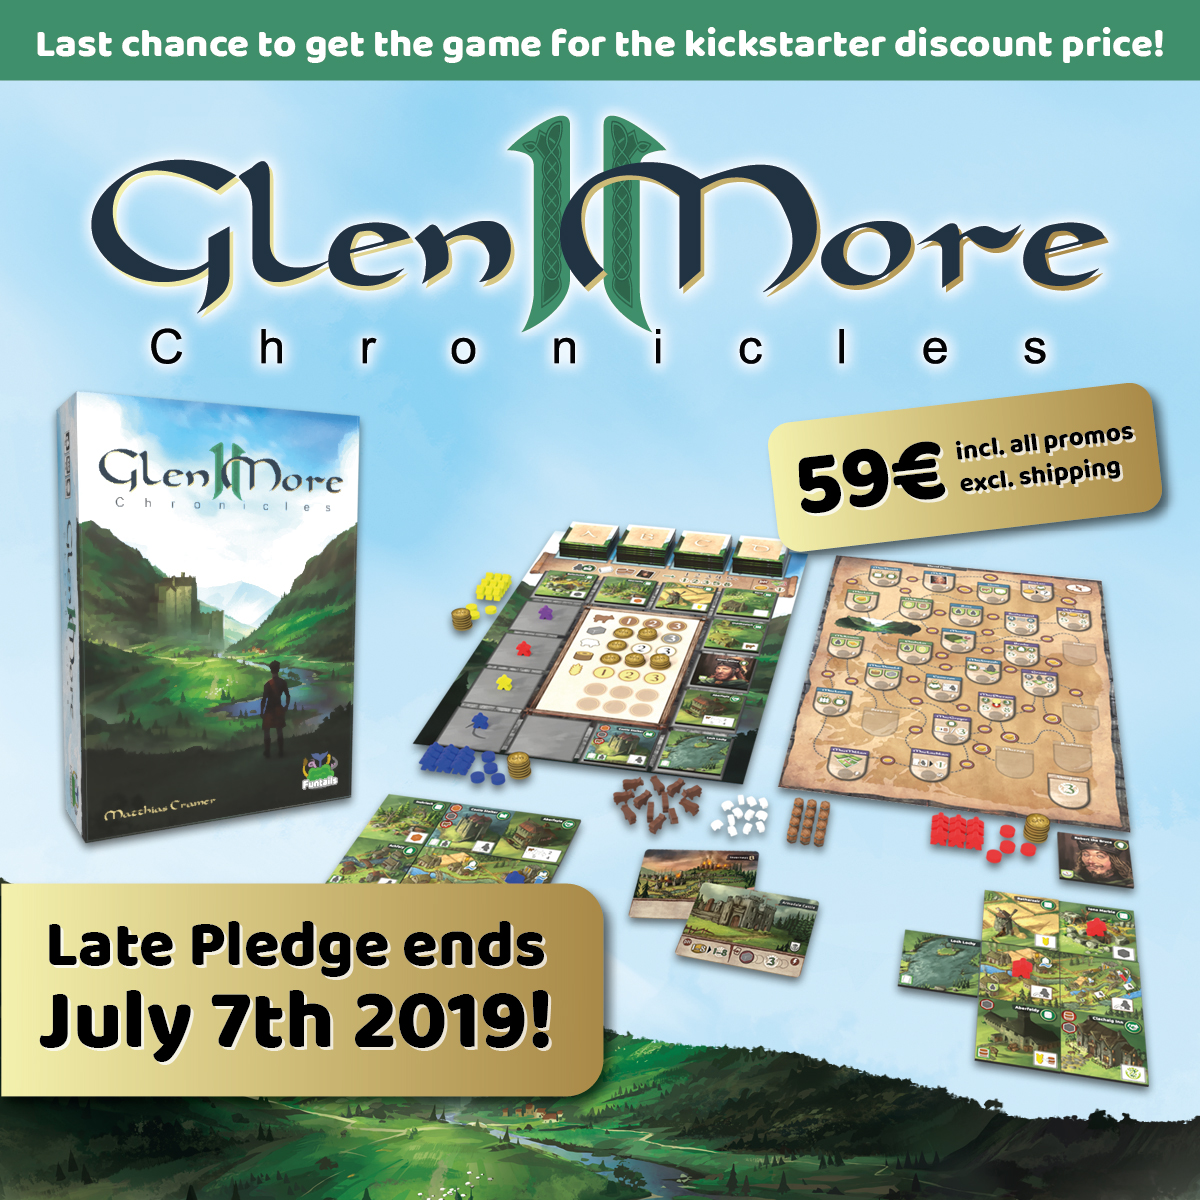 “Glen More II Chronicles” for 59 Euro with all Promos